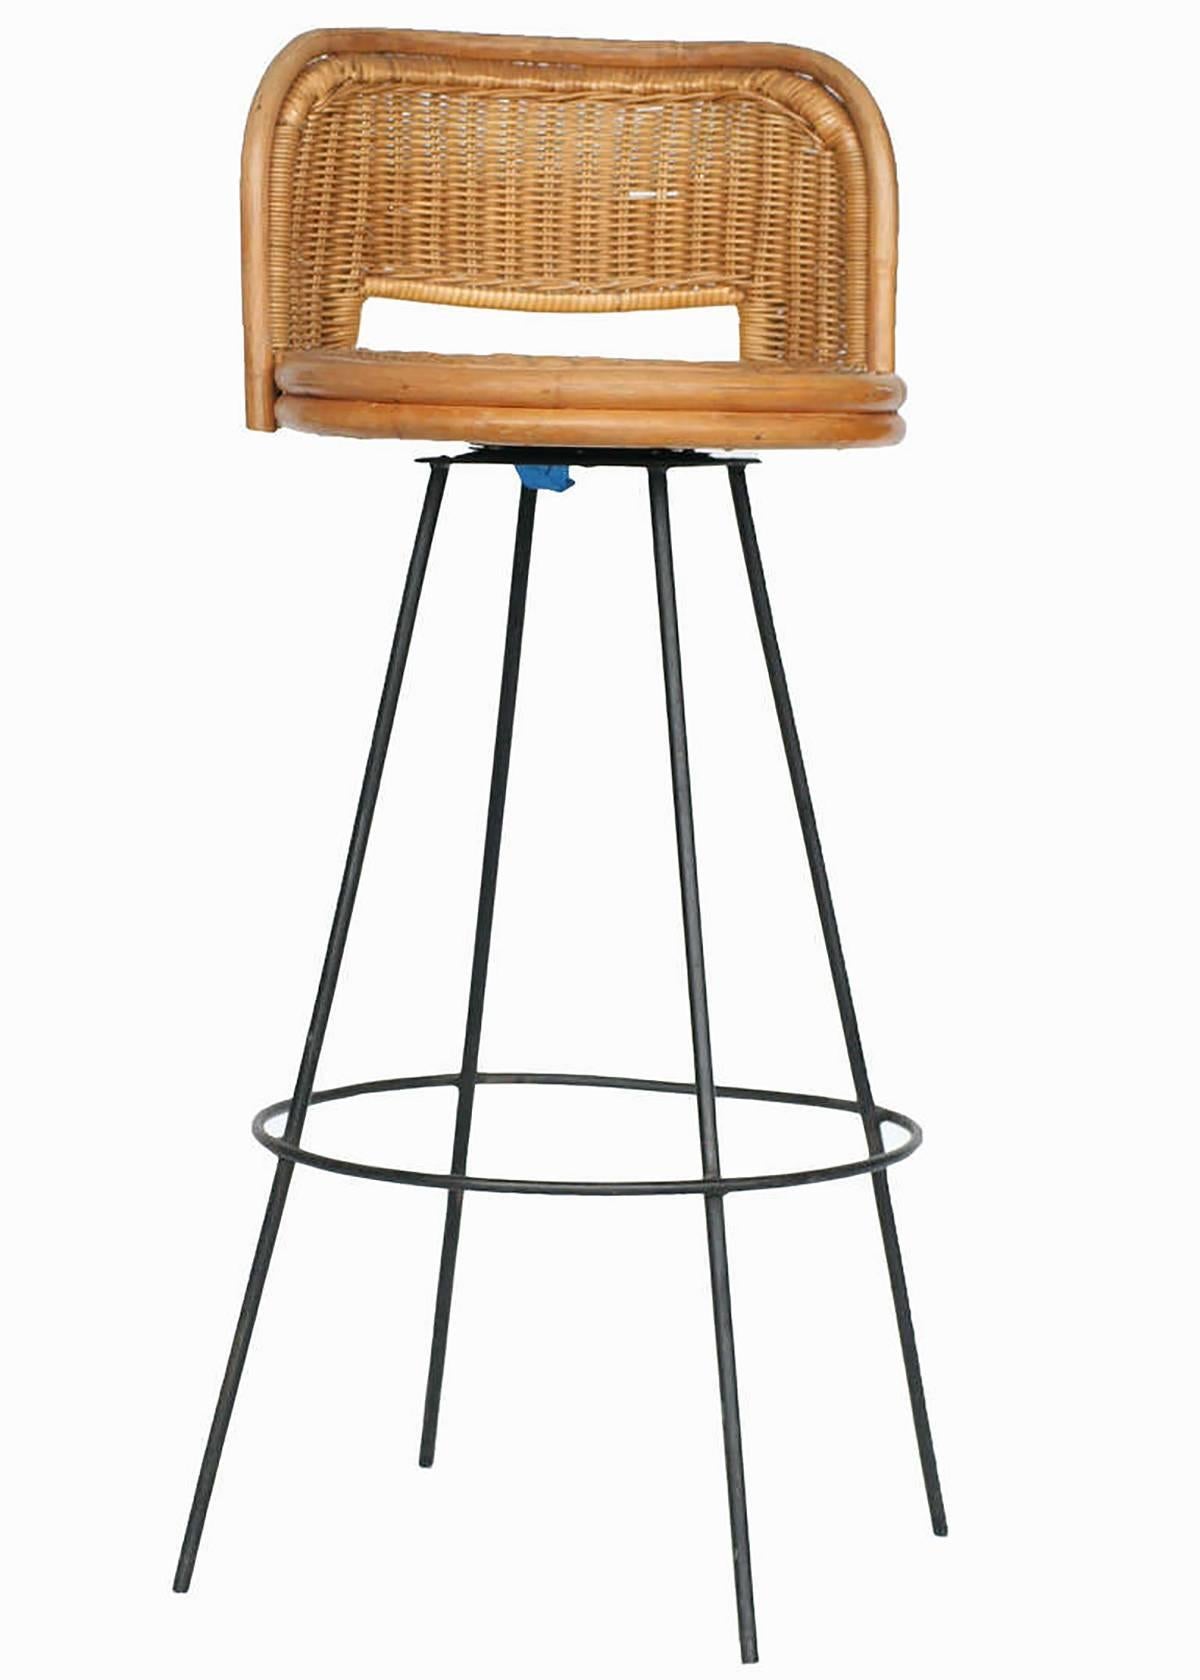 Seng of Chicago rattan and metal swivel bar stool pair with seat backs. This delicate combination of rattan and metal is a perfect match for any midcentury home or Tropical getaway. 

The rattan shows no signs of wear or breaks. The metal bases